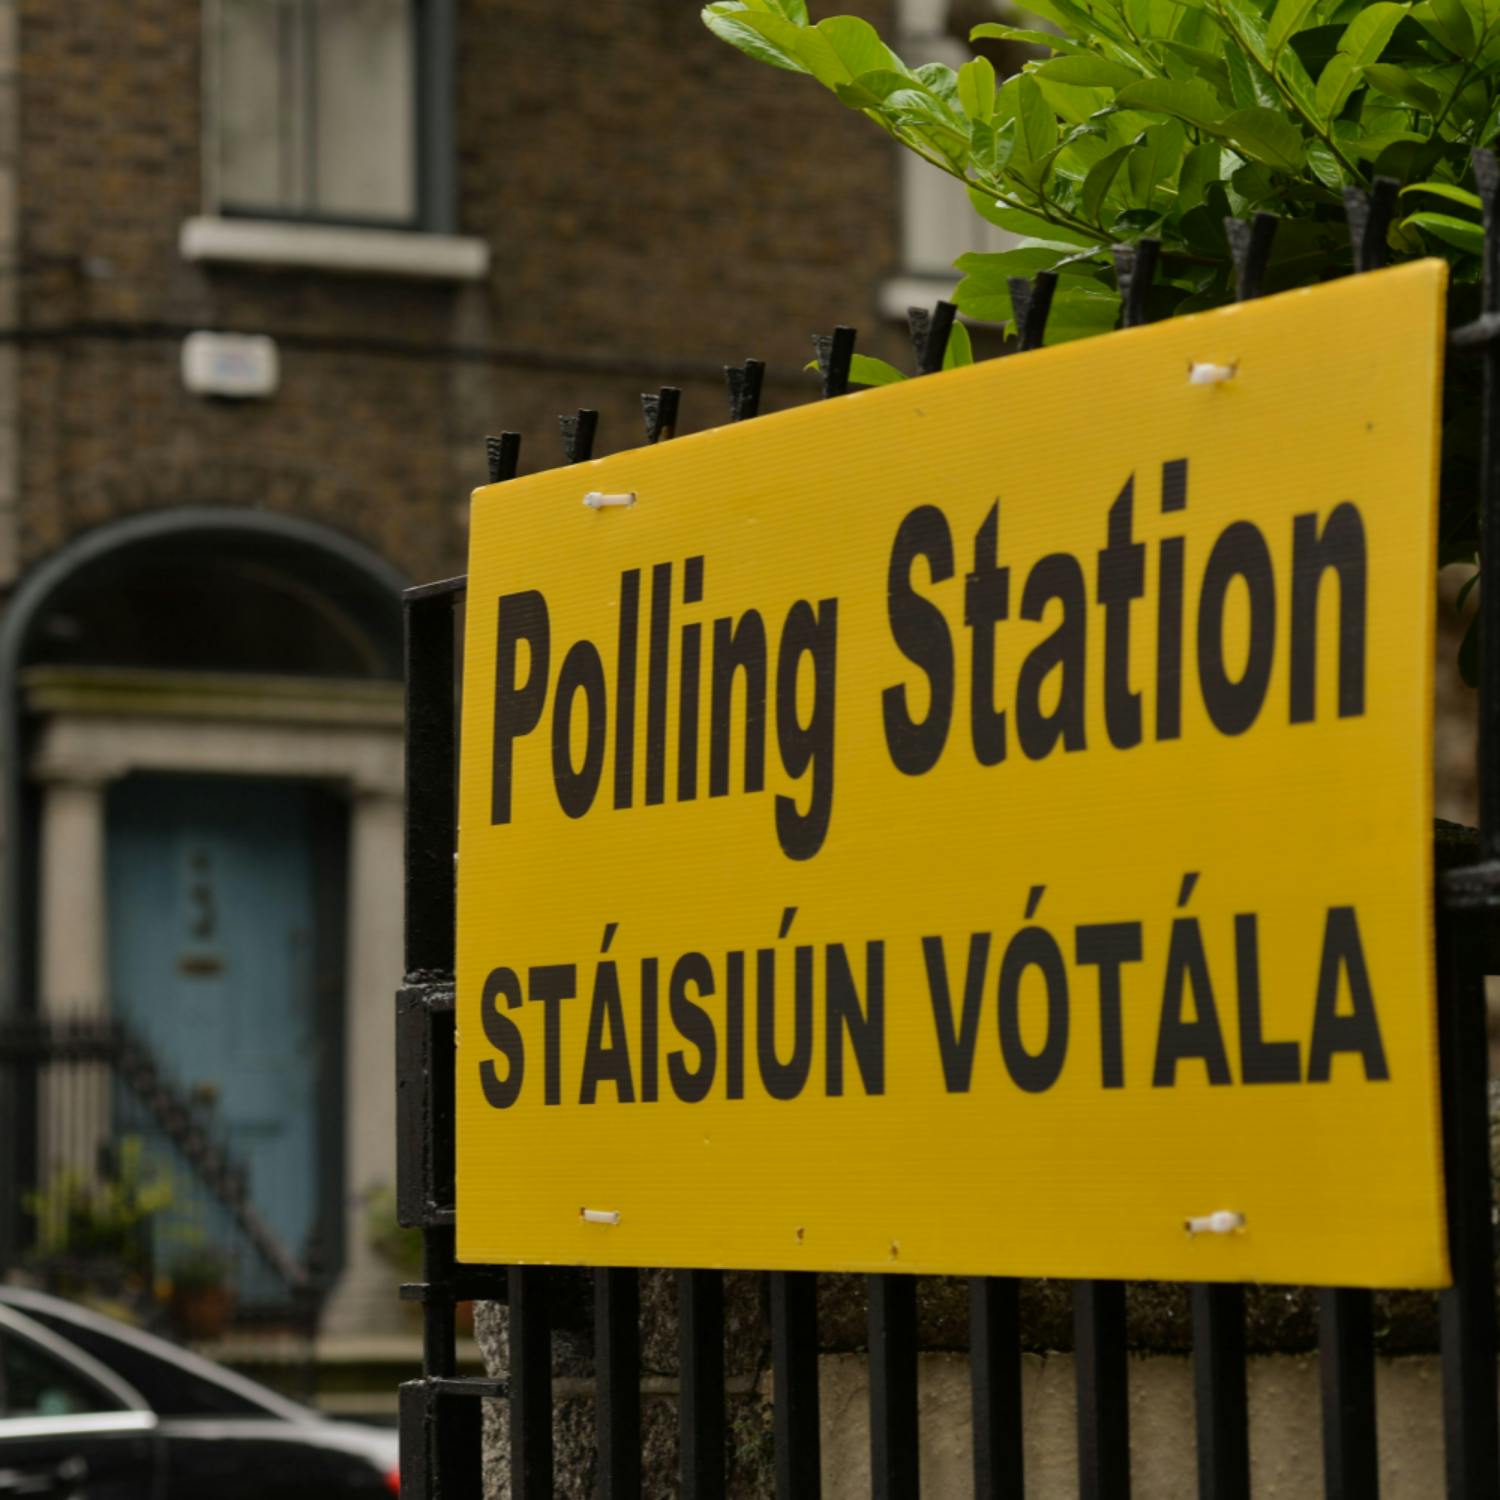 Local and European elections: What are the main issues?